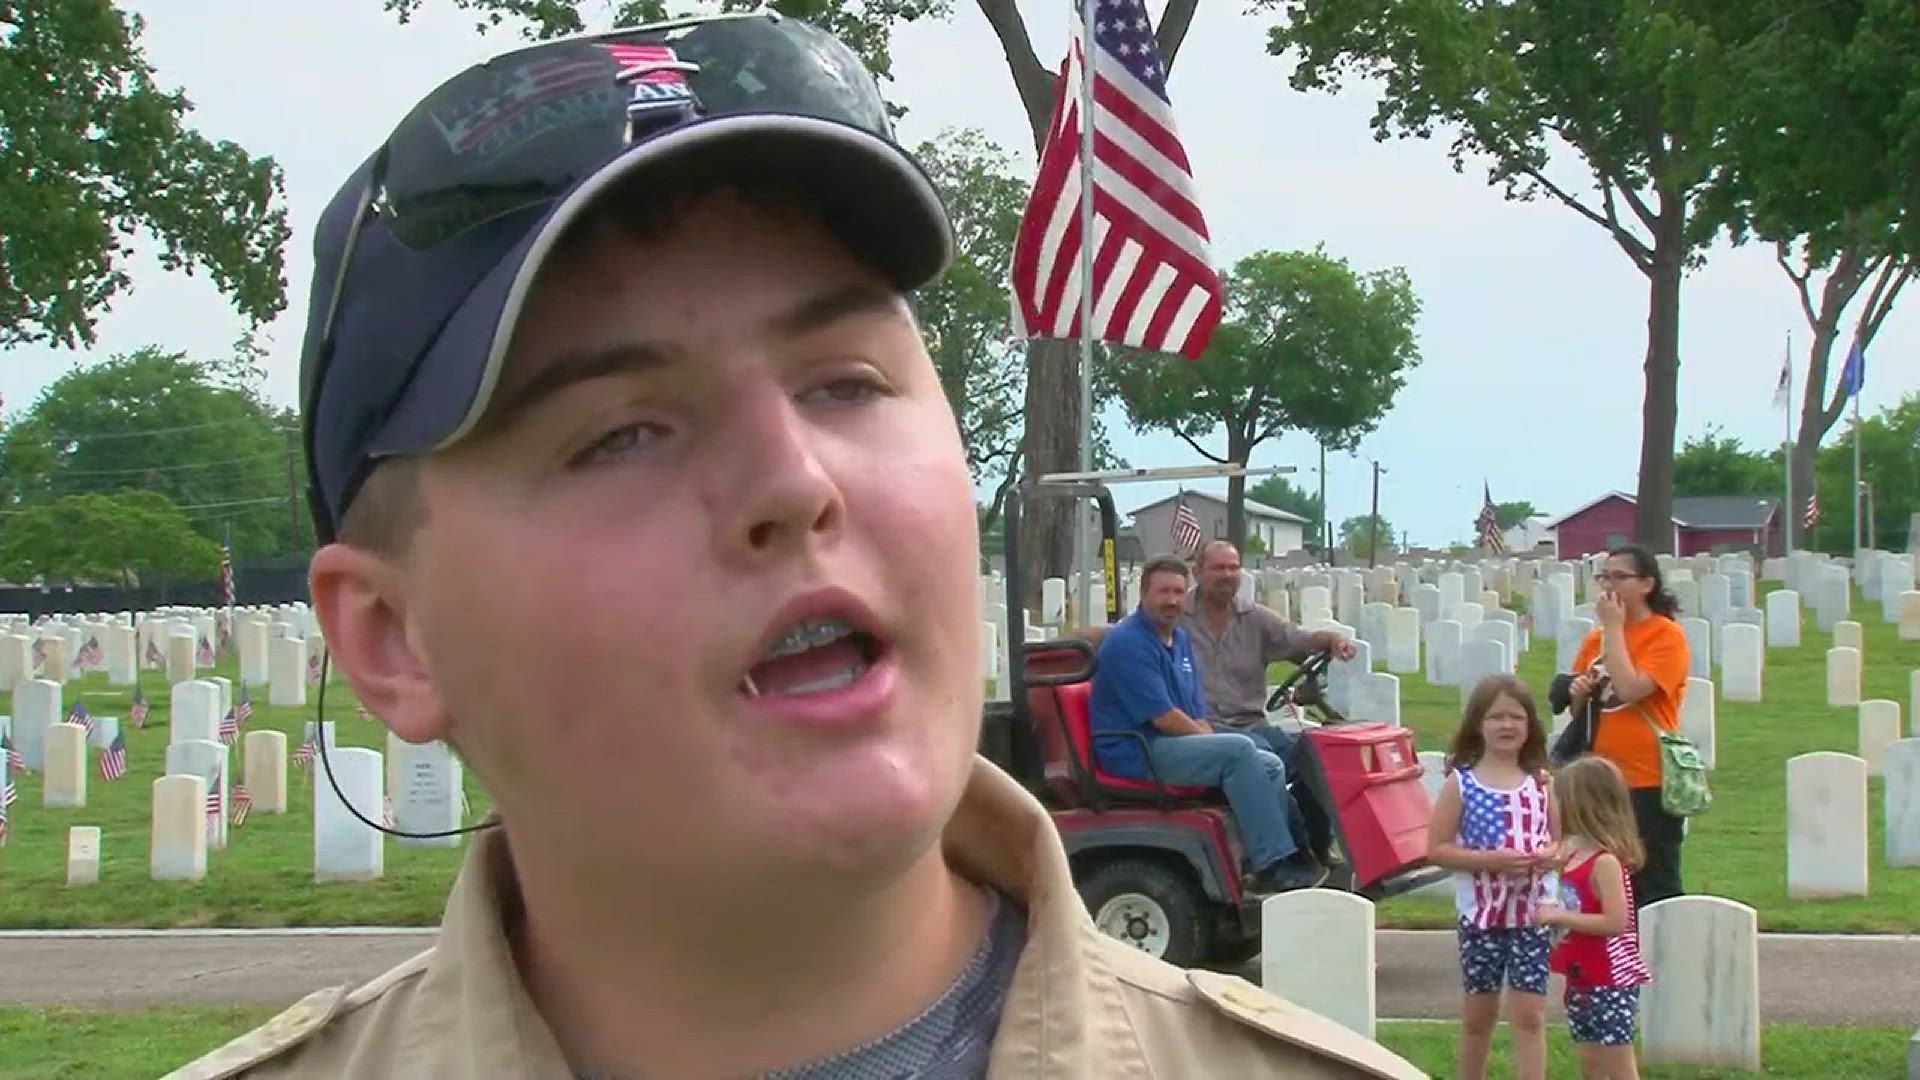 Local Boy Scout troops placed hundreds of flags Saturday morning at Knoxville National Cemetery.